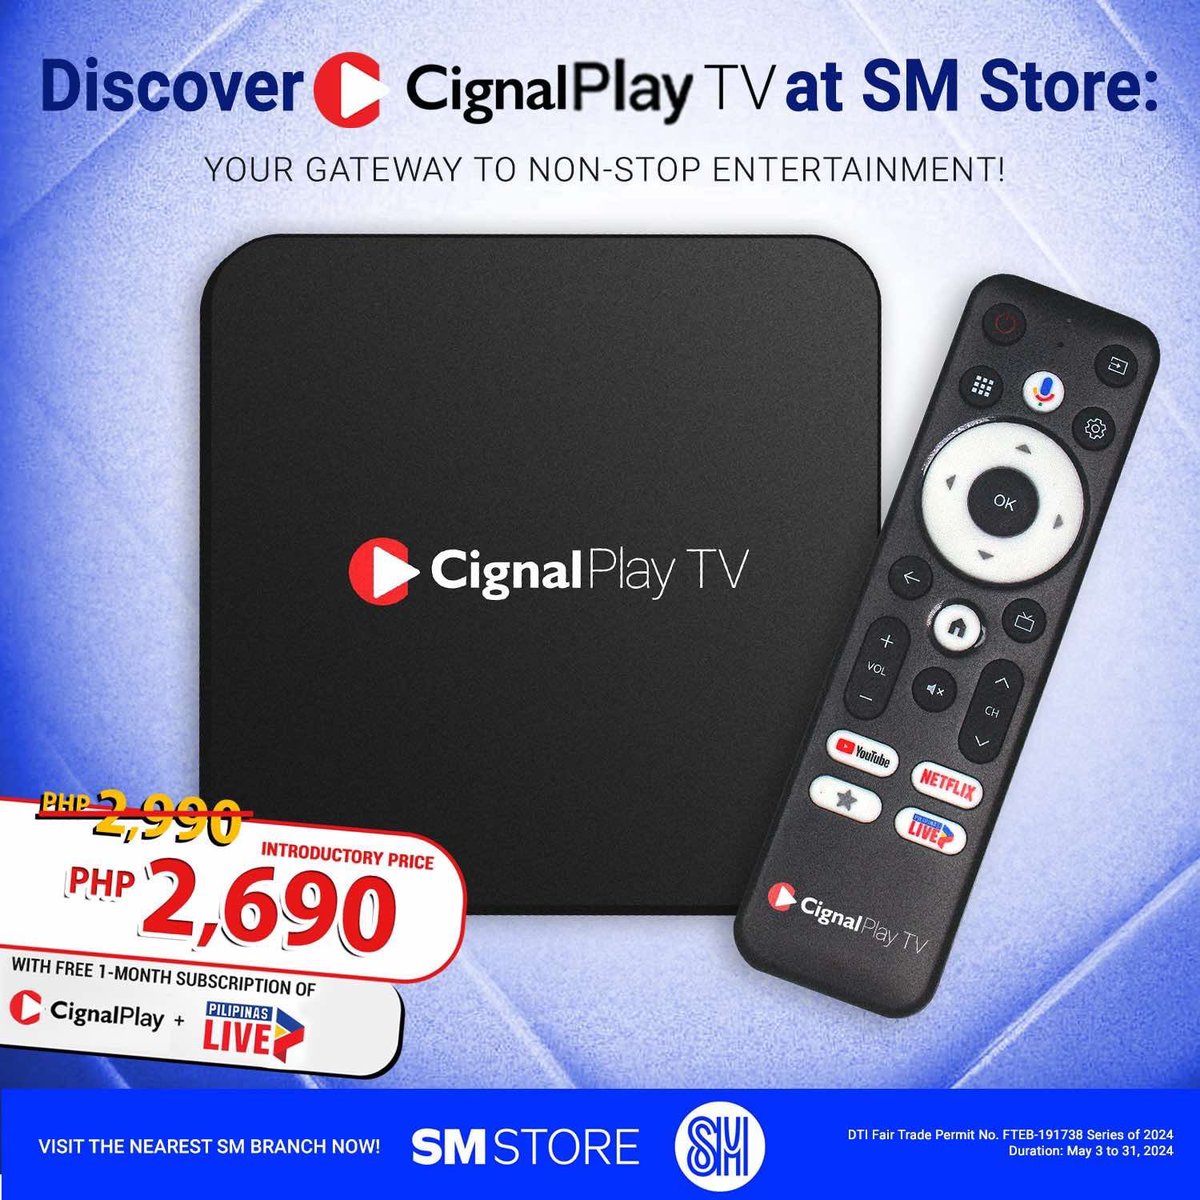 STARTING THE WEEK WITH A GOOD DEAL FOR YOU KA-CPLAY! 🤩 

Get the Cignal Play TV now at an intro price of ₱2,690 on all SM Stores so you can plug, play and connect with ease to enjoy live TV channels and stream your favorite apps. 

#PlayingForAll